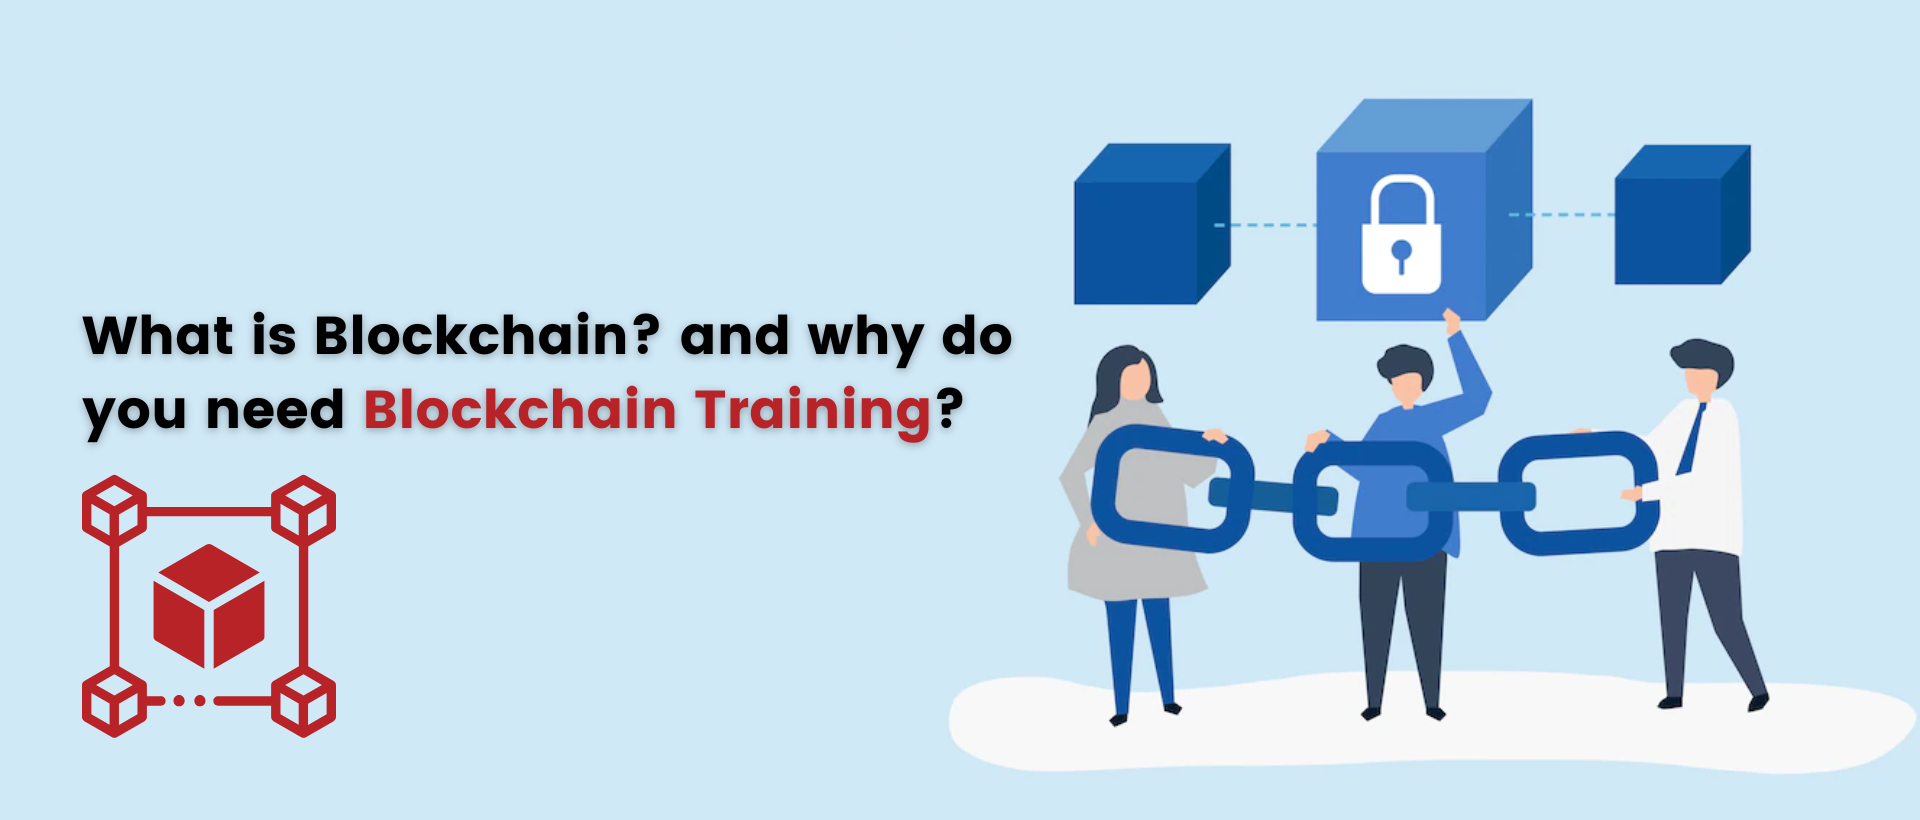 What is Blockchain? and why do you need Blockchain Training?